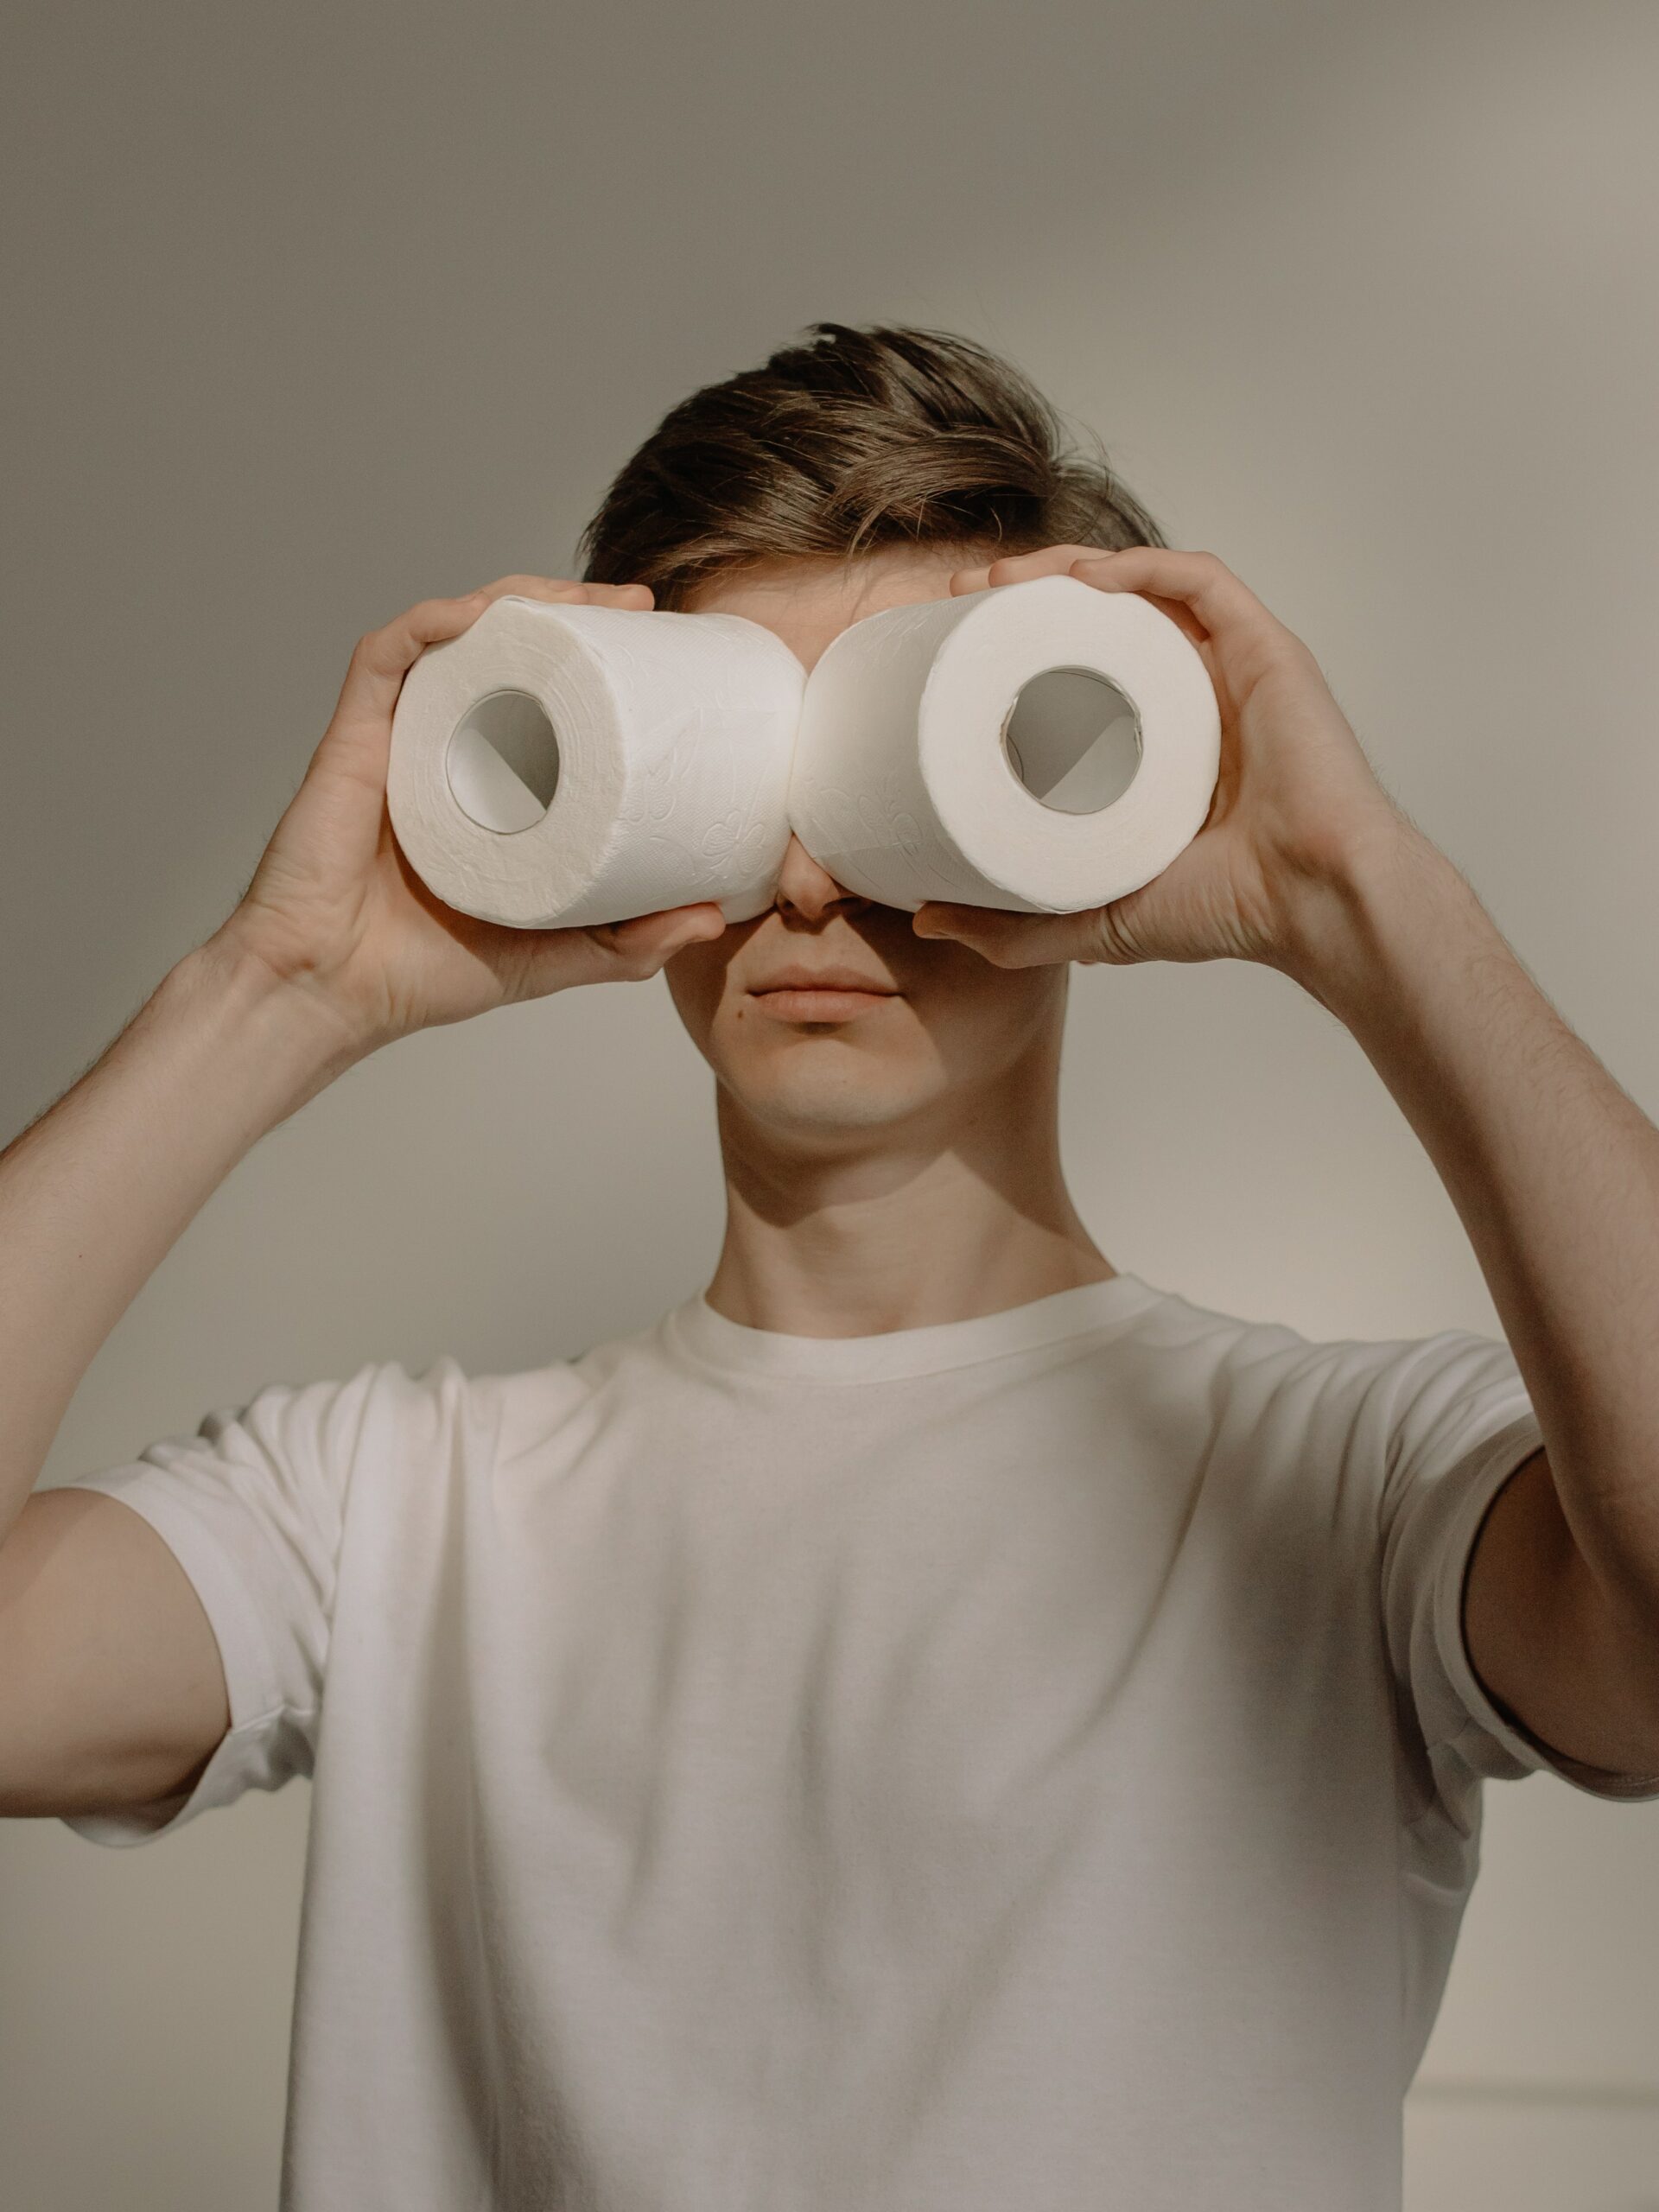 Someone is holding toilet paper rolls over their eyes like binoculars. They are straight-faced, and it’s a very funny-looking photo.